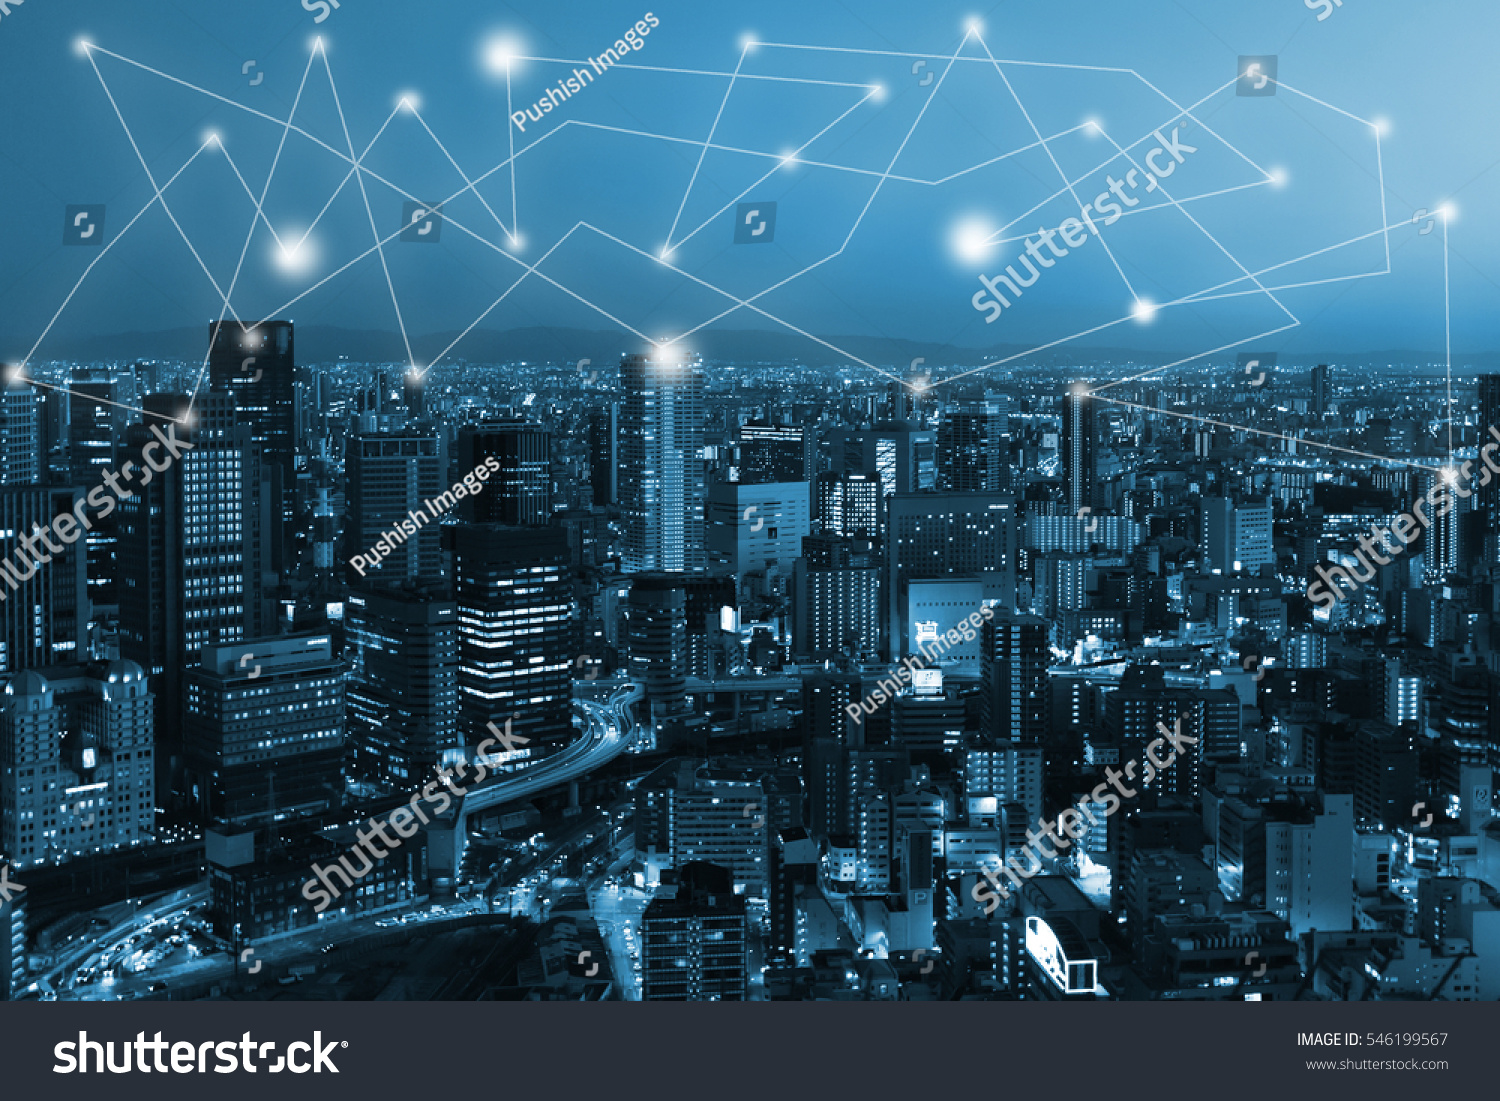 city scape and network connection concept for new global business. Blockchain connect #546199567